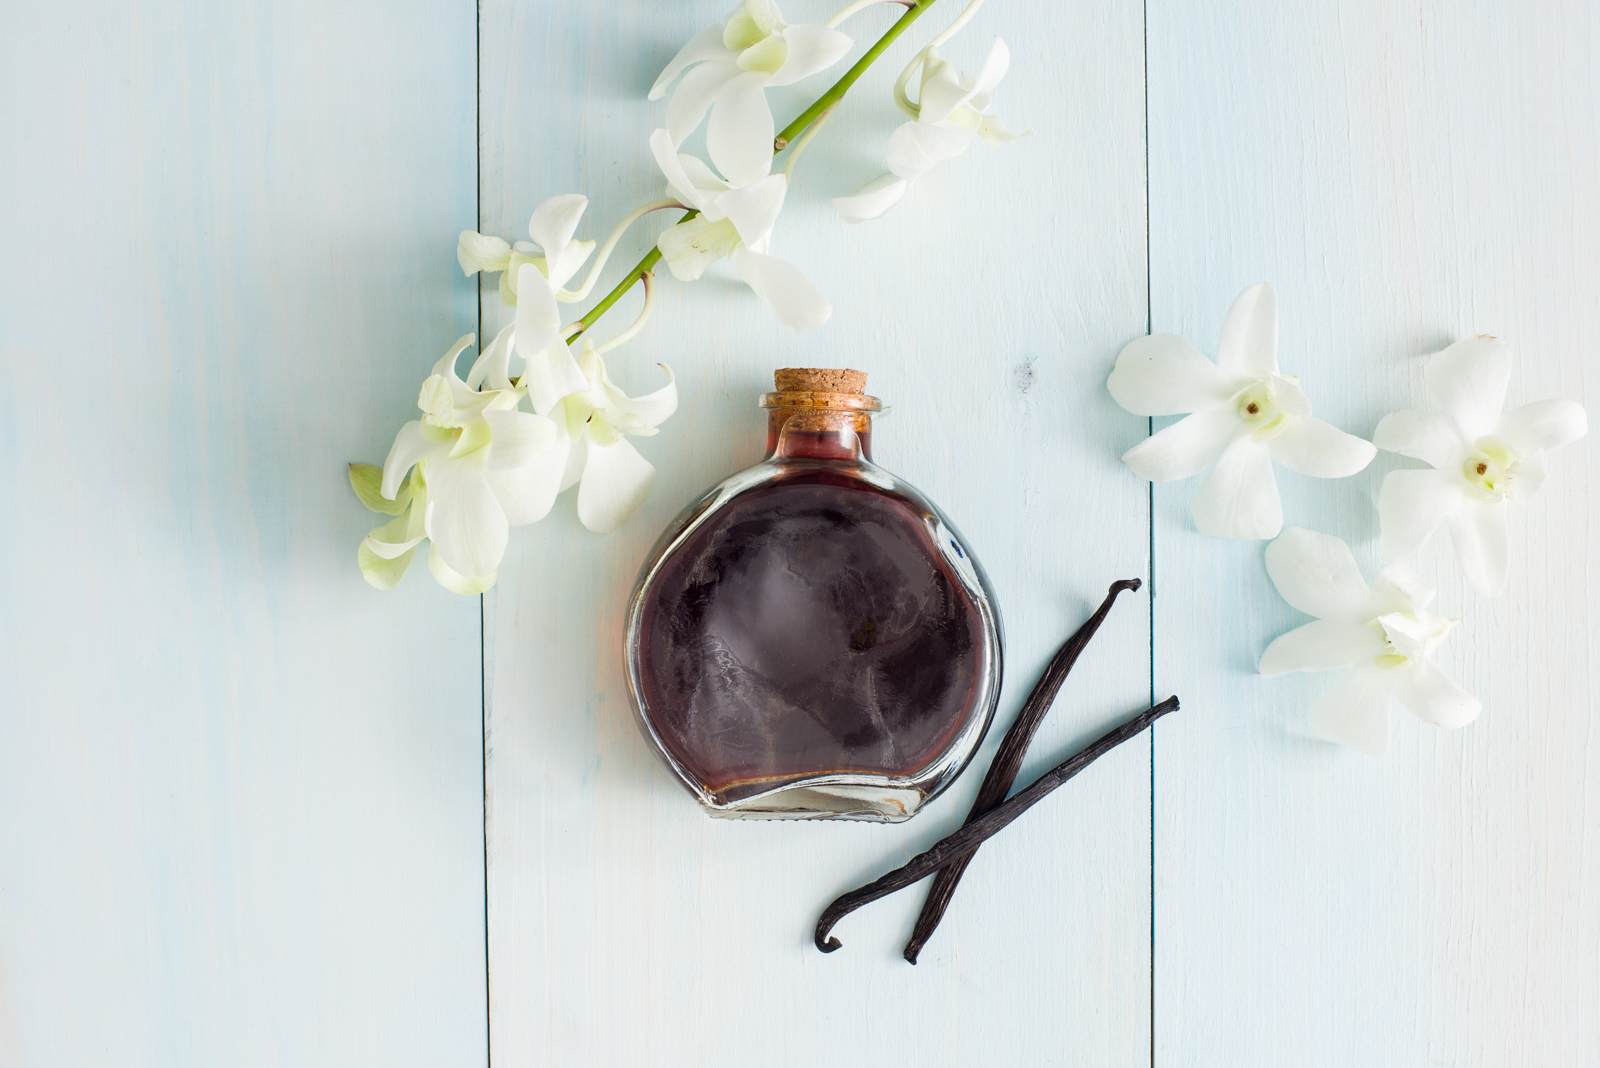 Background of white washed wood with glass bottle of vanilla extract surrounded by vanilla flowers and beans